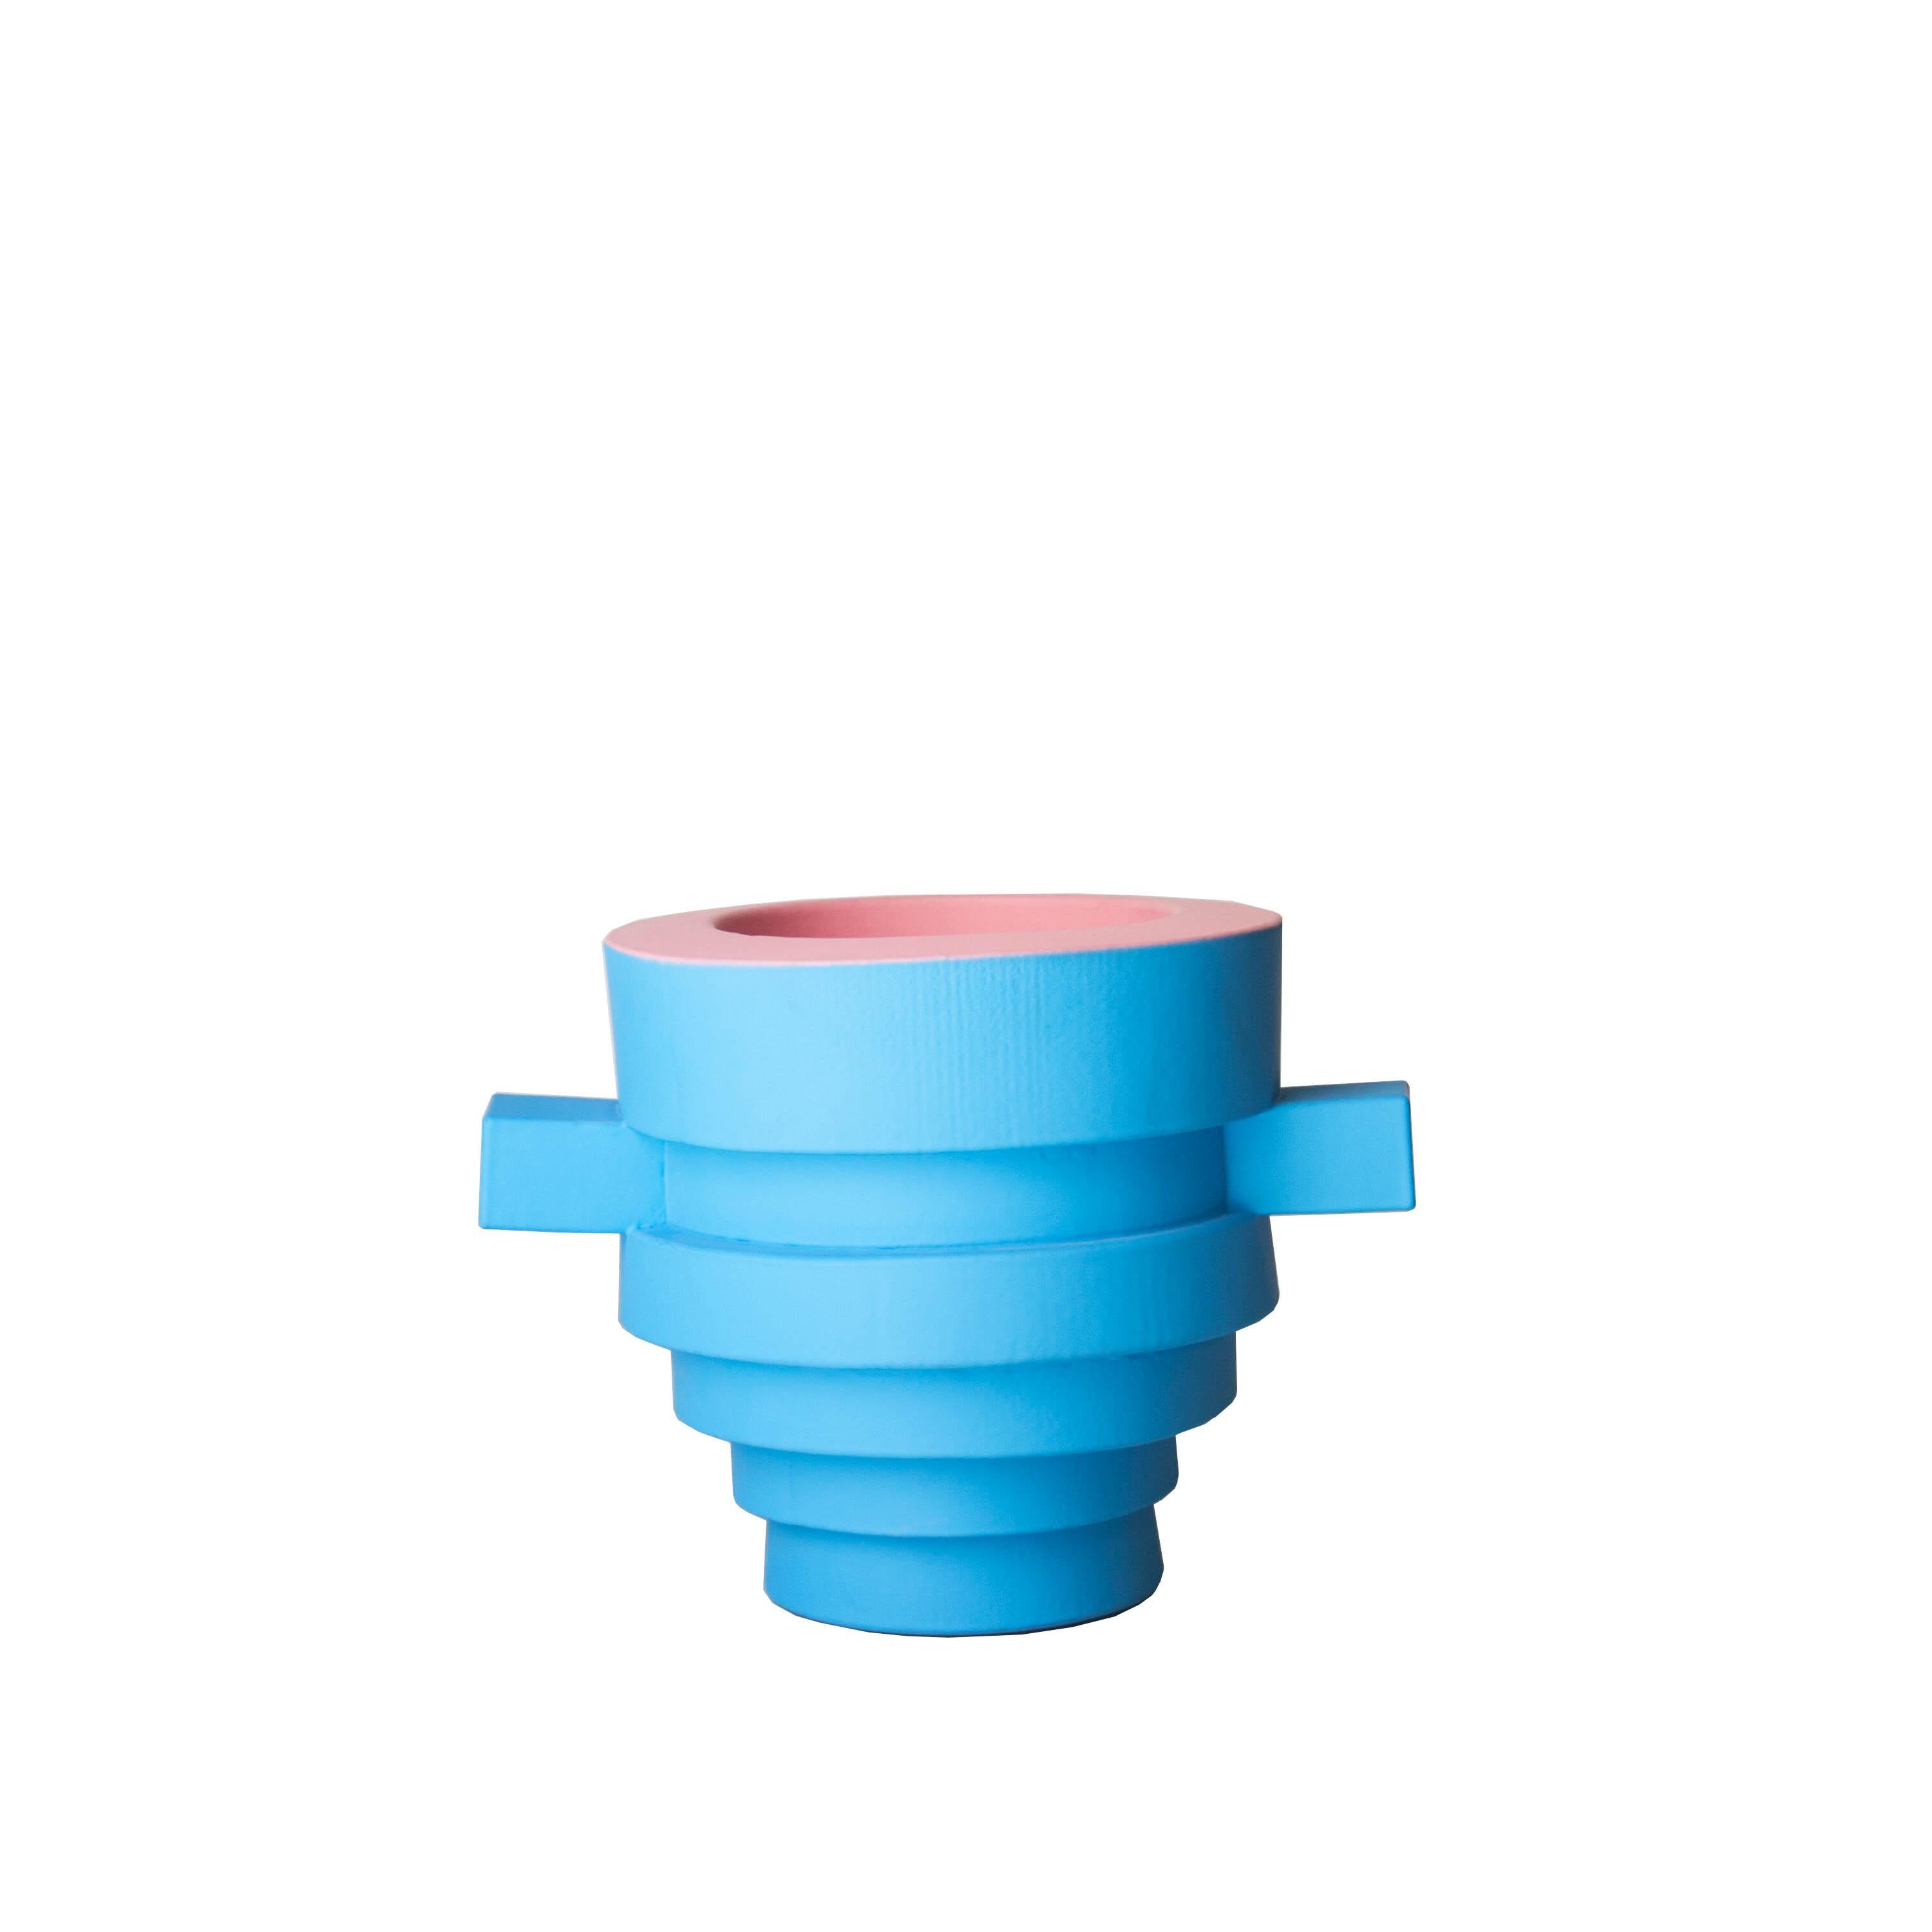 Vases designed by Joel Blanco, with foam structure and rubber coated painted in blue and pink.